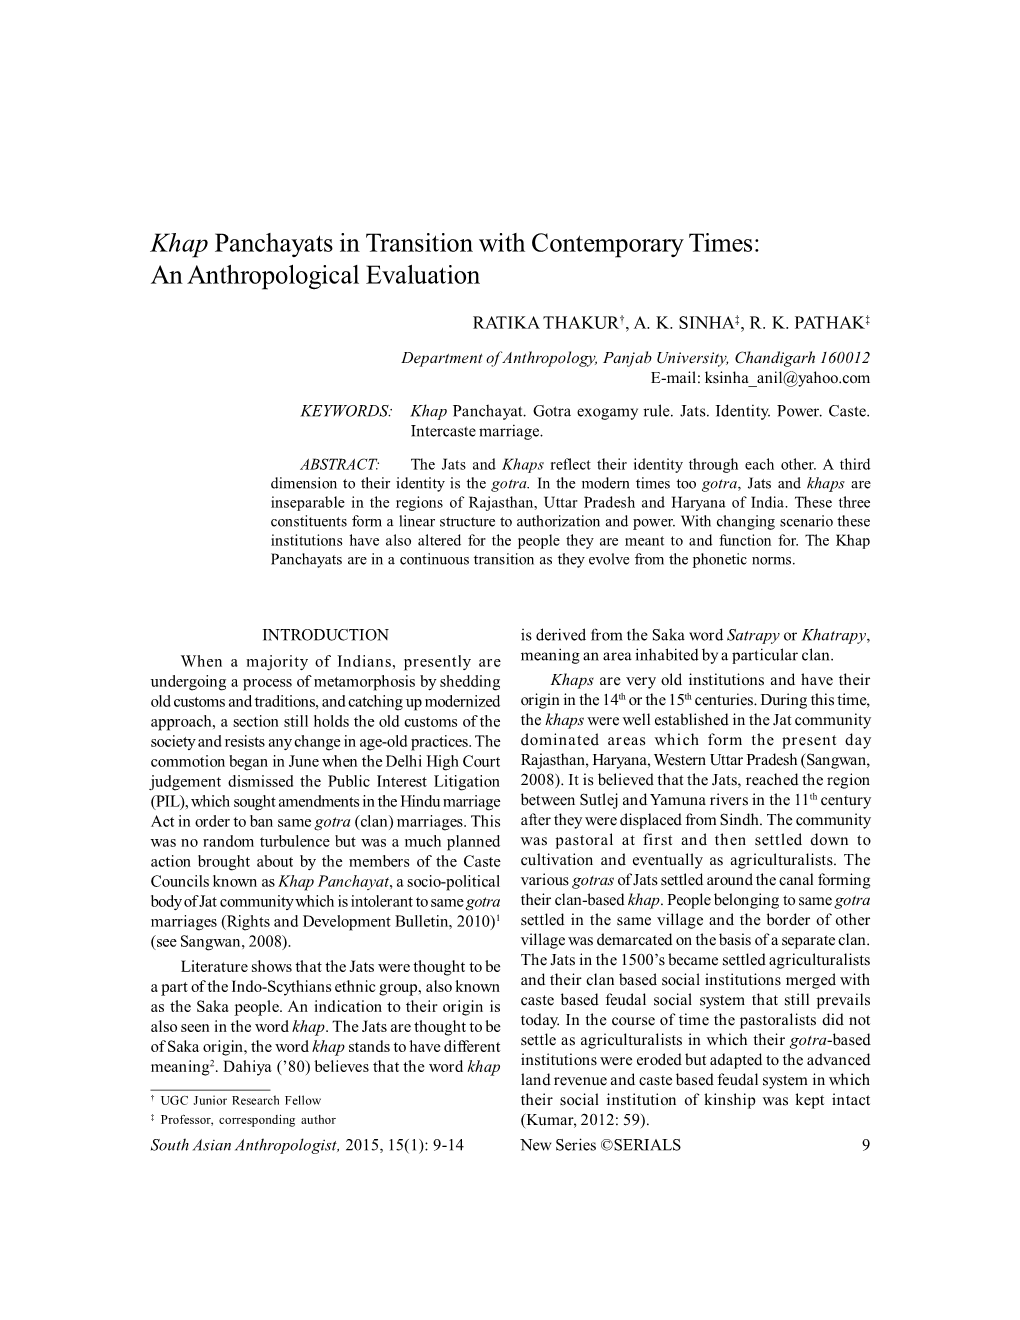 Khap Panchayats in Transition with Contemporary Times: an Anthropological Evaluation